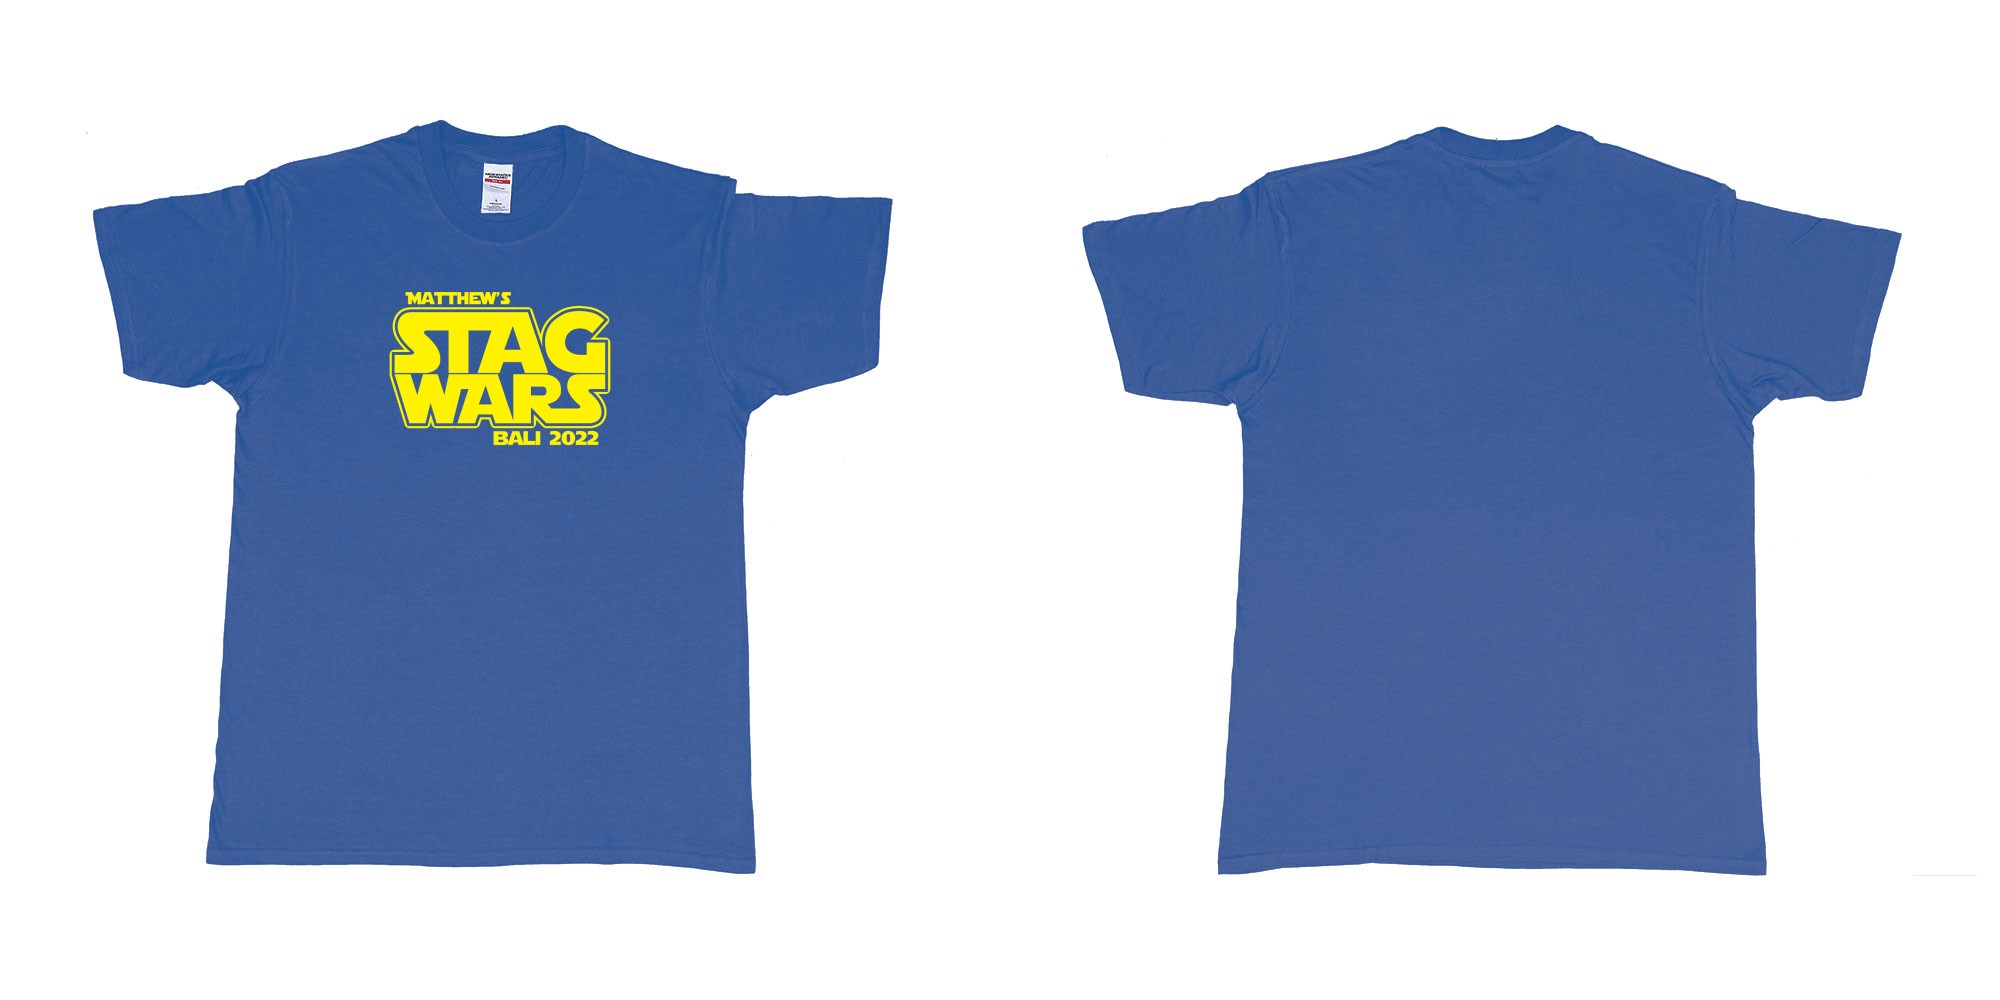 Custom tshirt design TPW Star Wars Stag in fabric color royal-blue choice your own text made in Bali by The Pirate Way